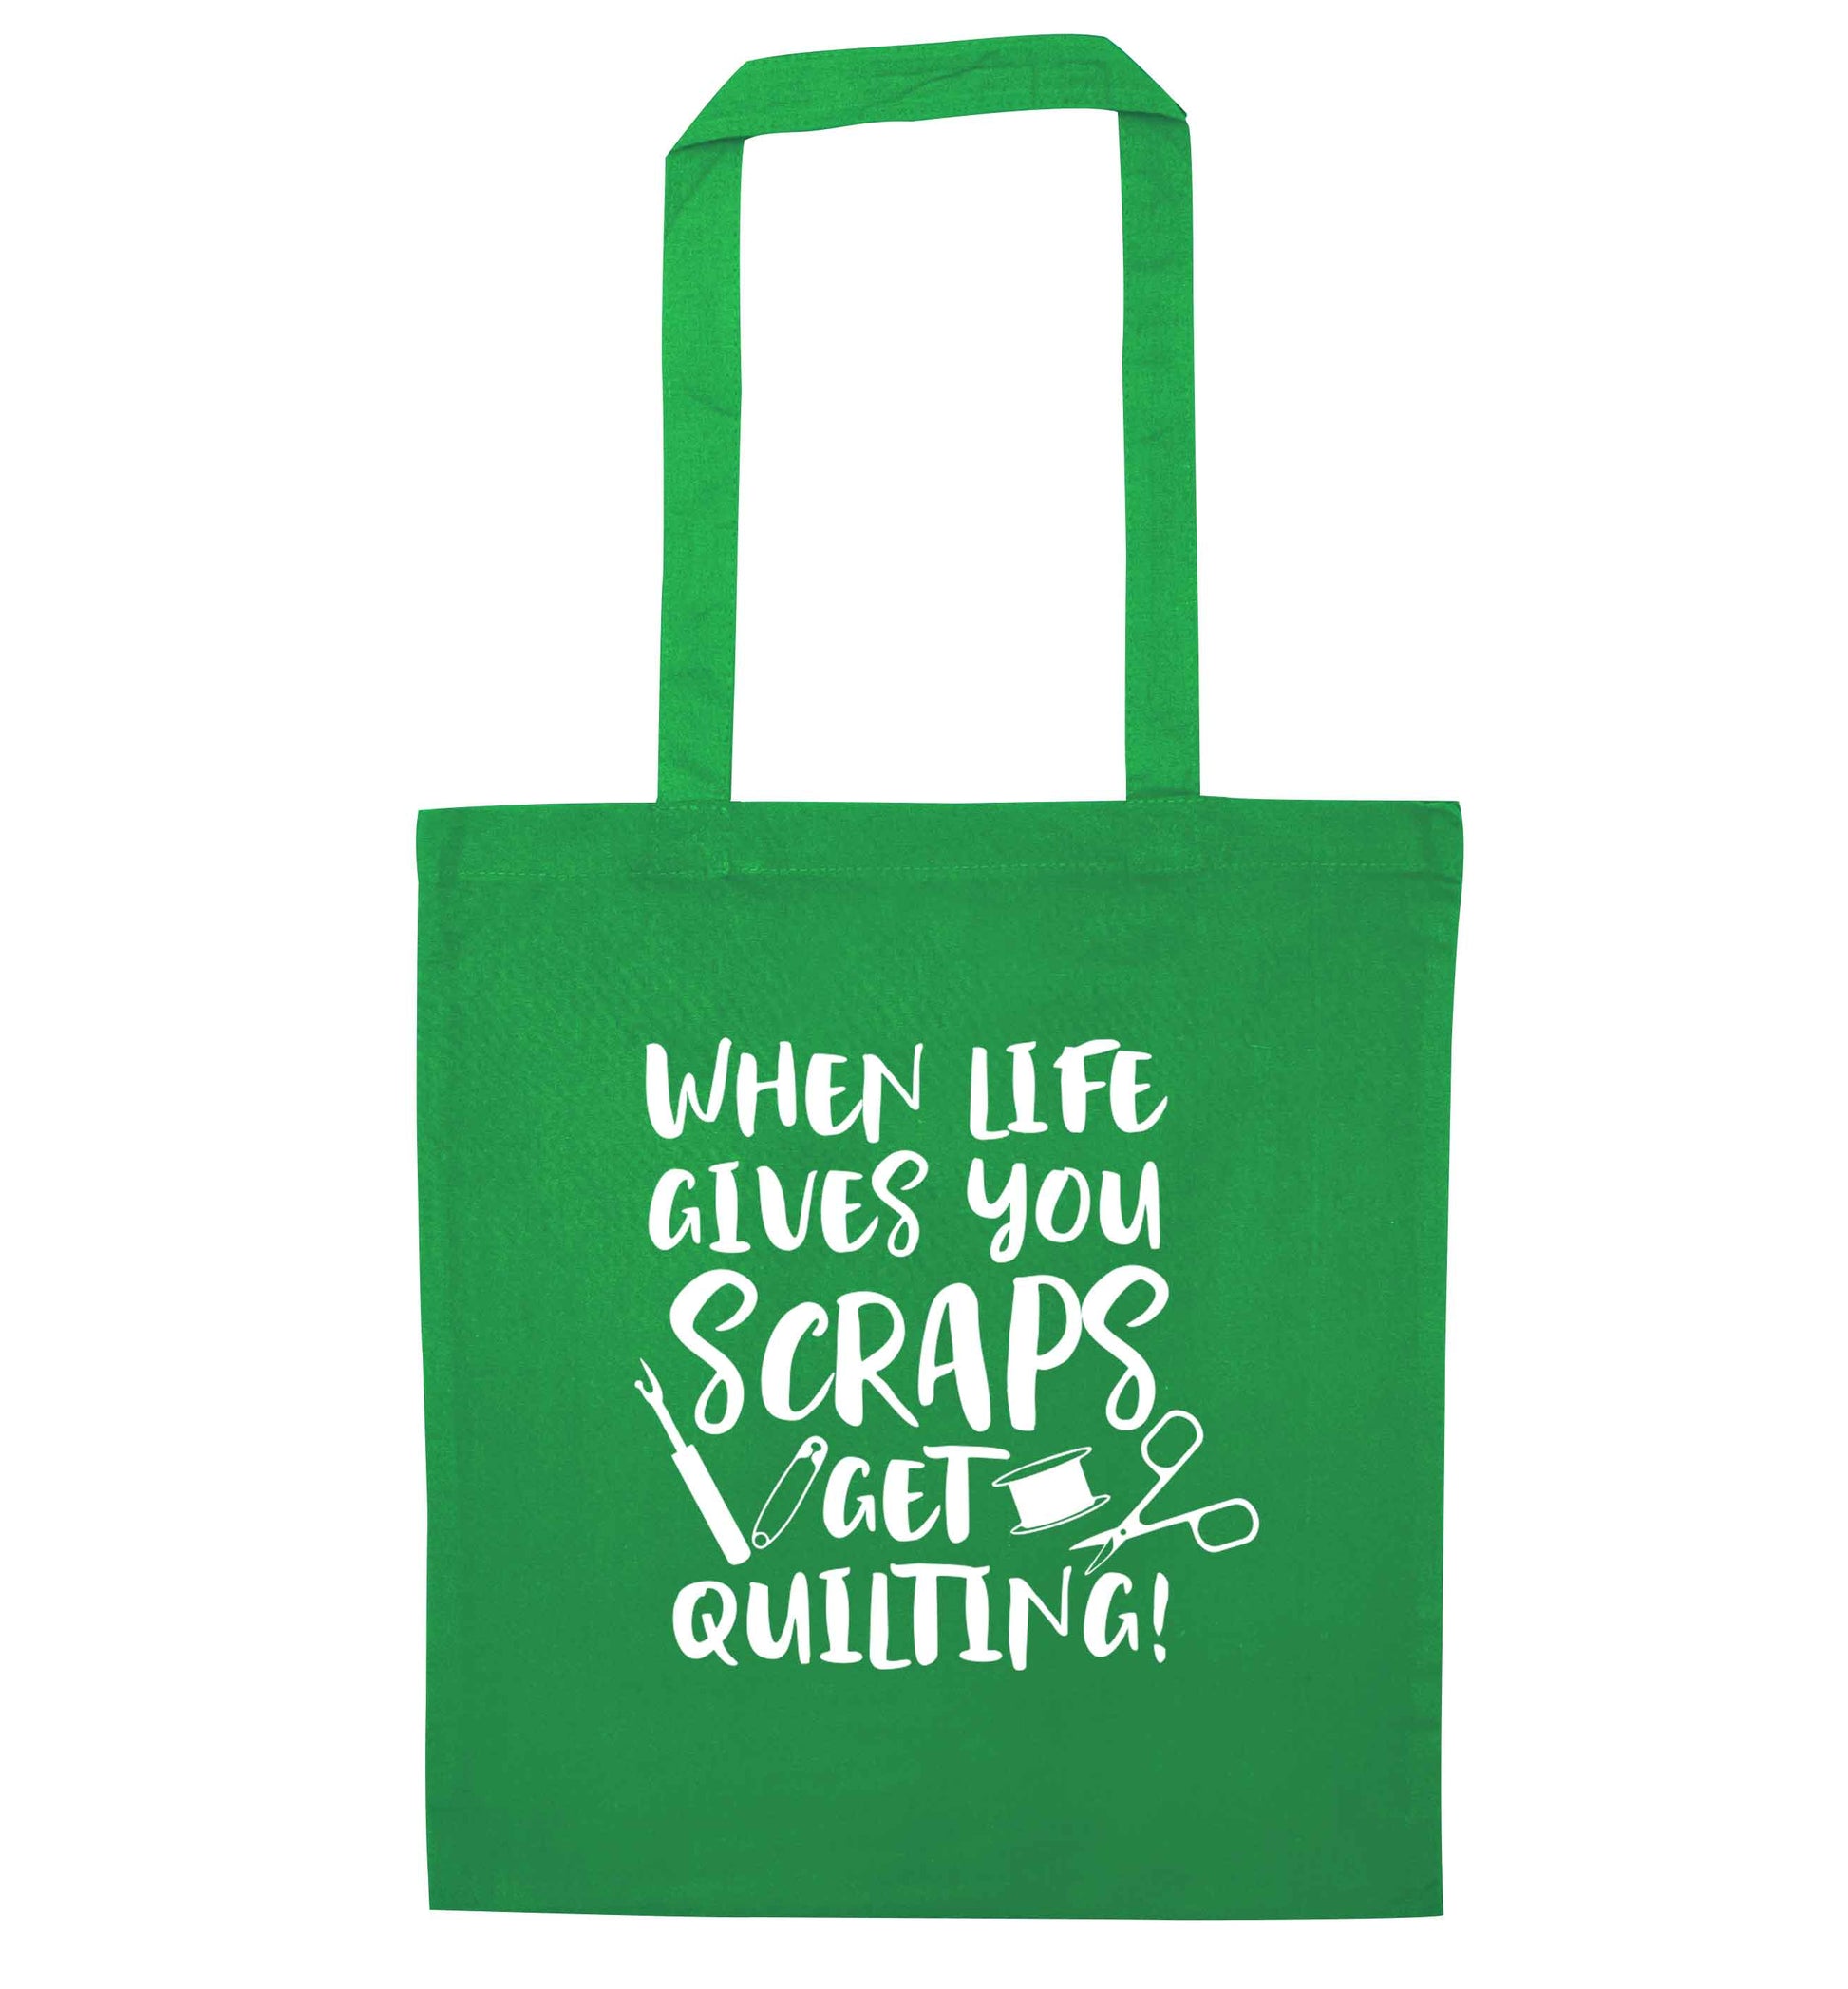 When life gives you scraps get quilting! green tote bag